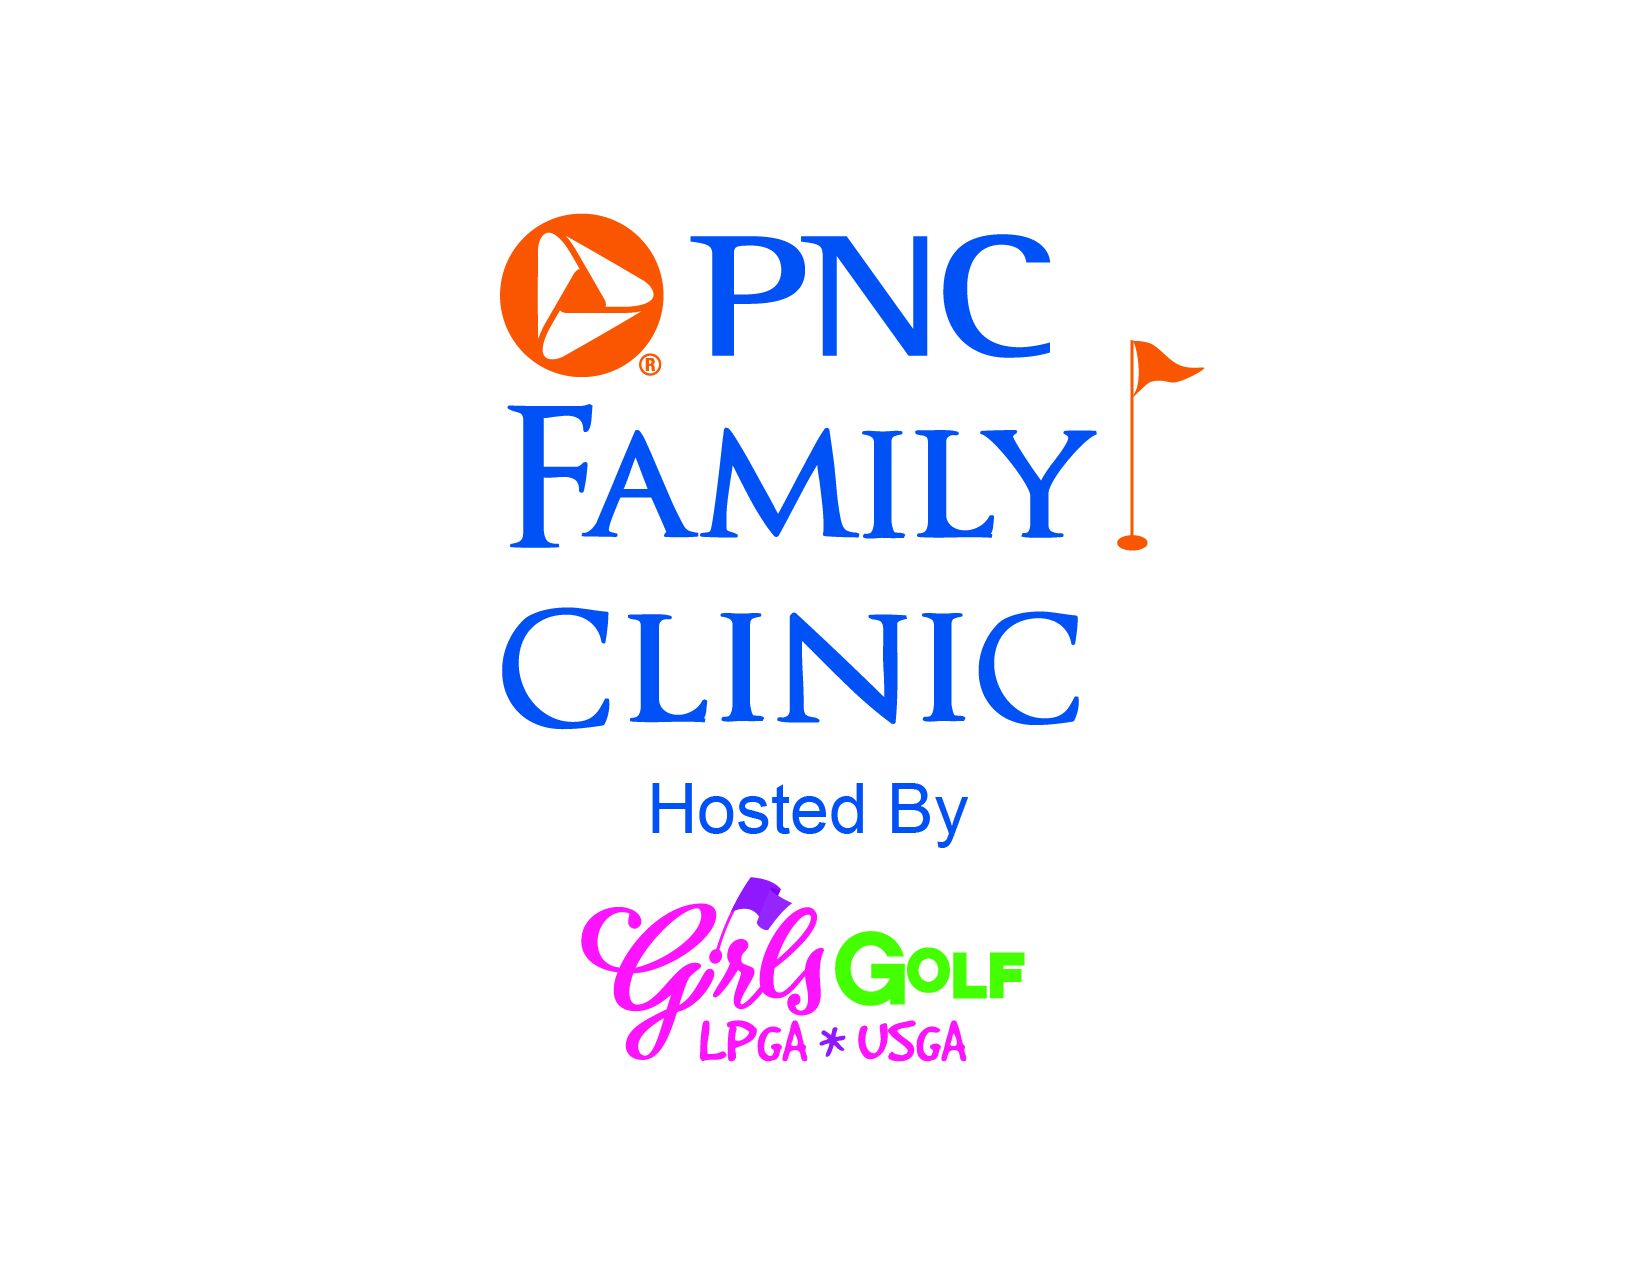 PNC Family Clinic